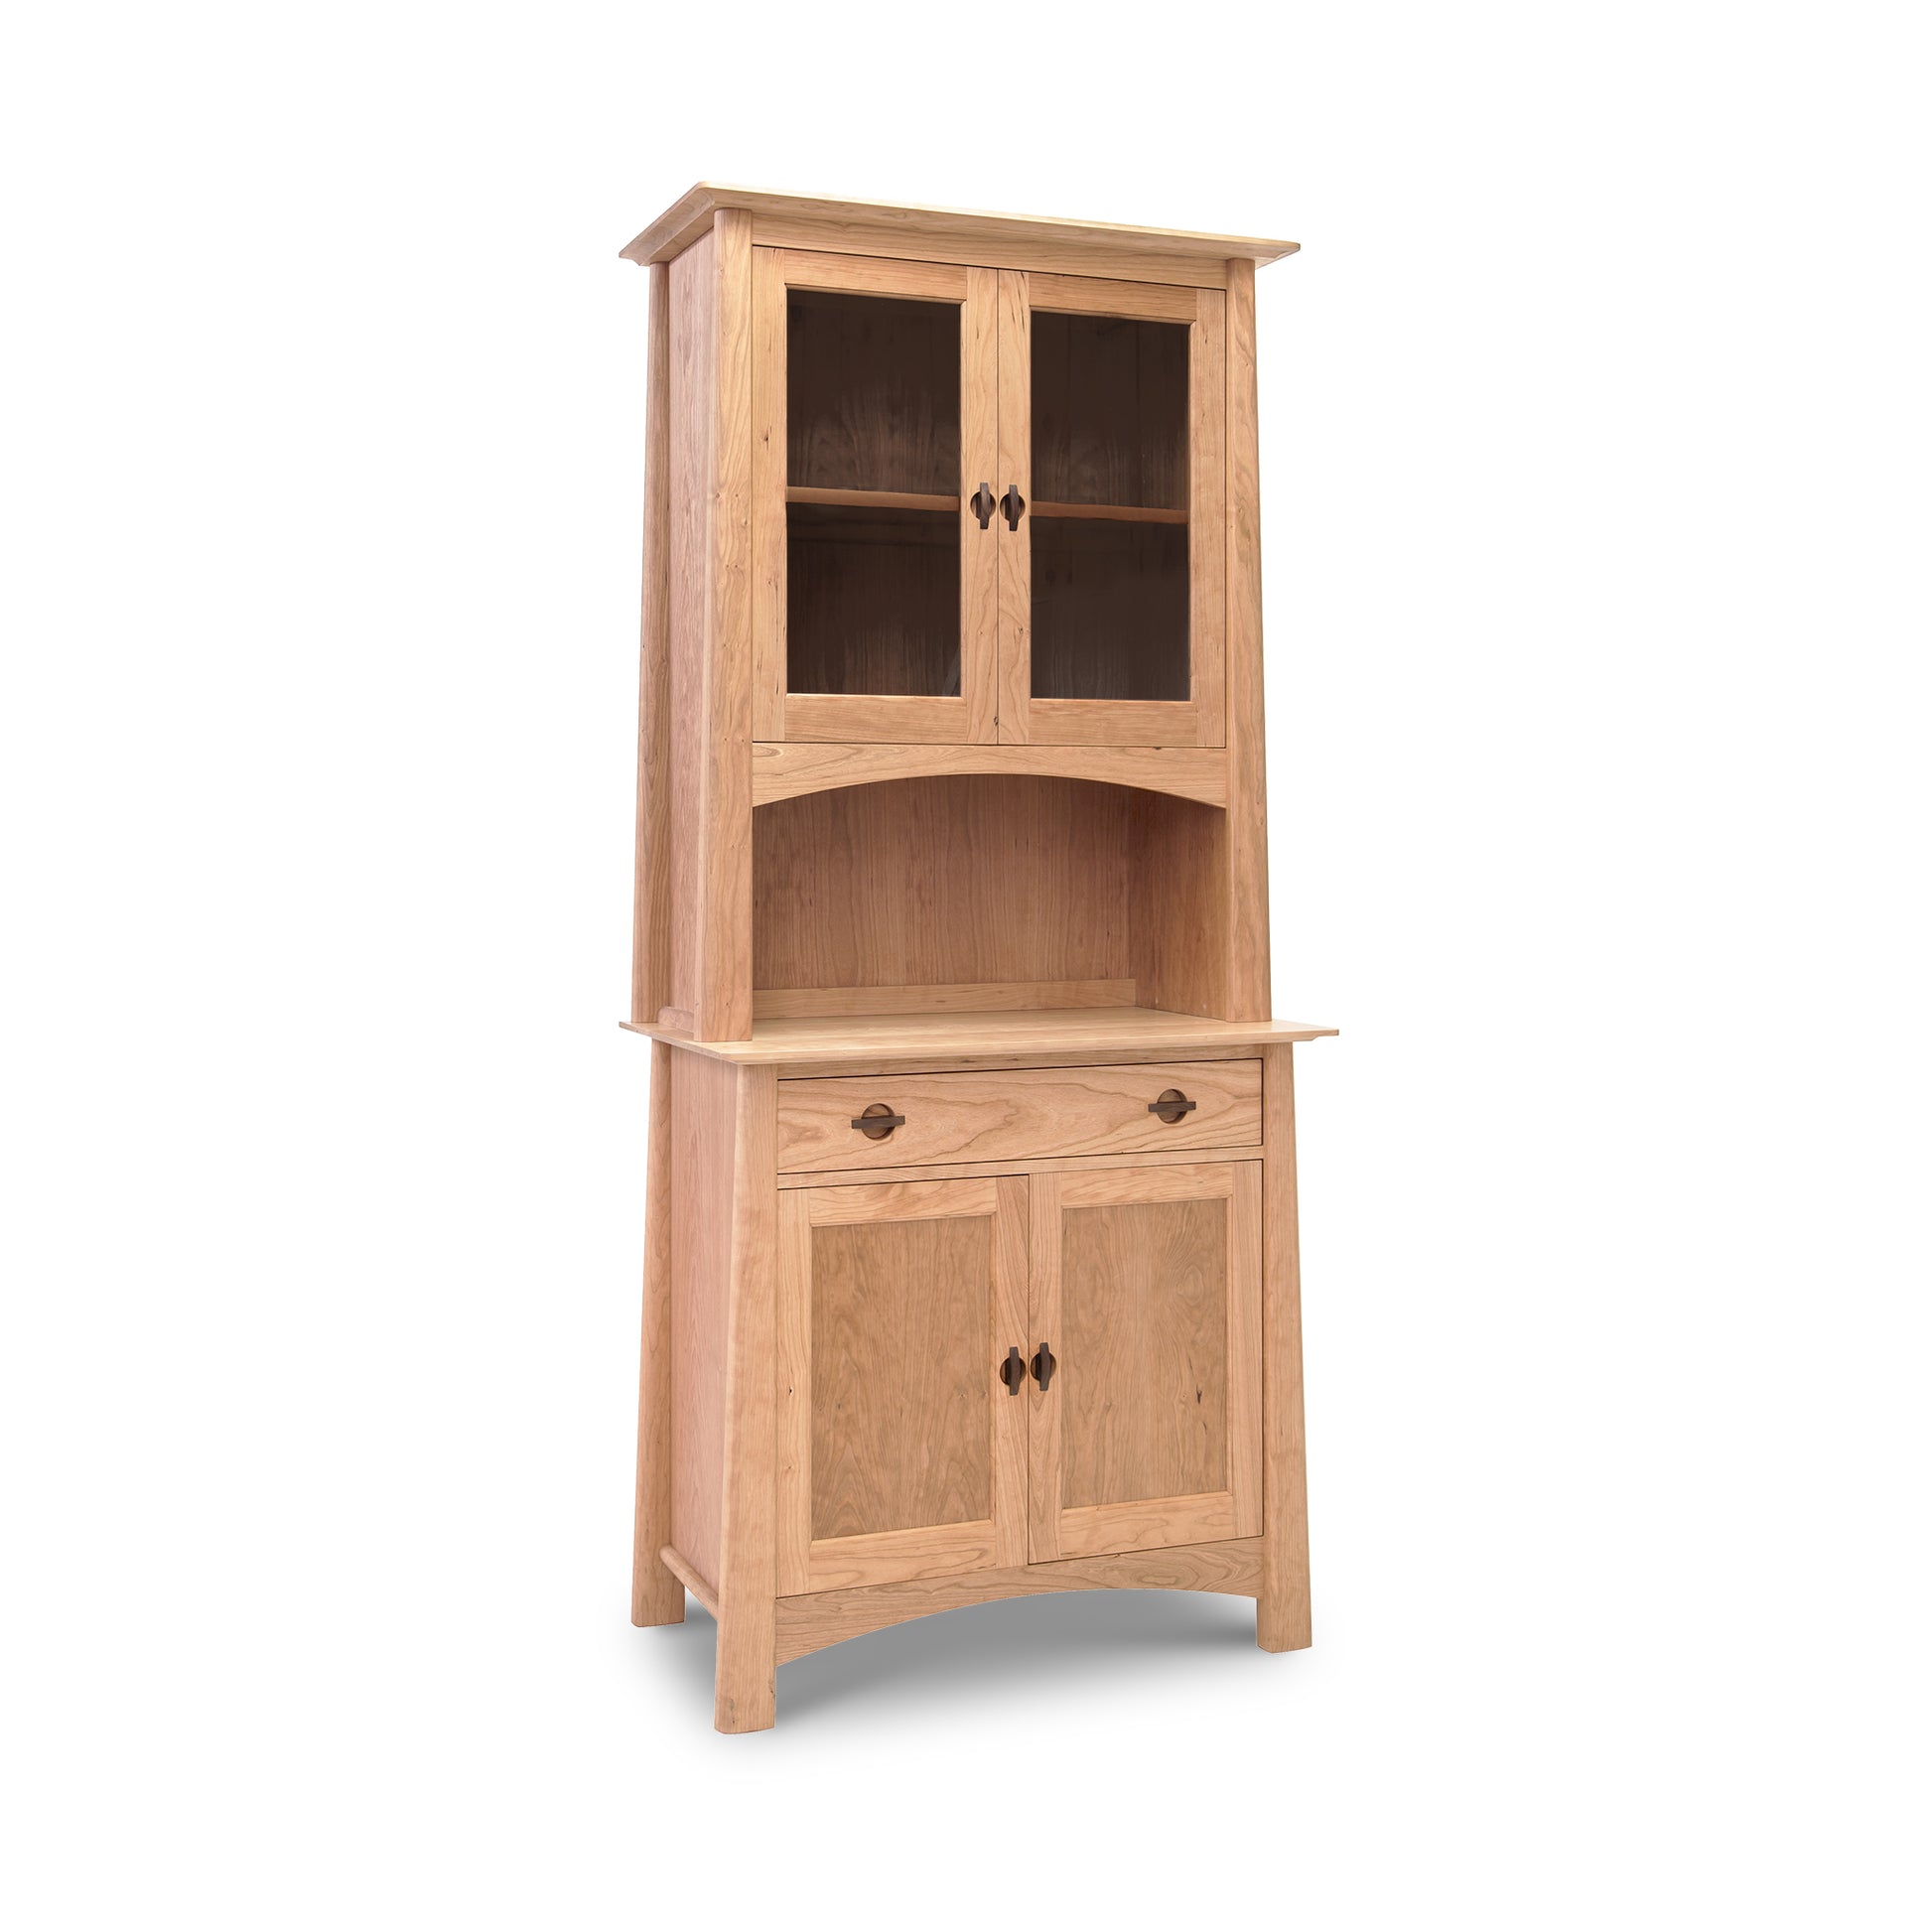 Maple Corner Woodworks Cherry Moon Small China Cabinet with upper glass-paneled cabinets and lower solid-door cabinets.